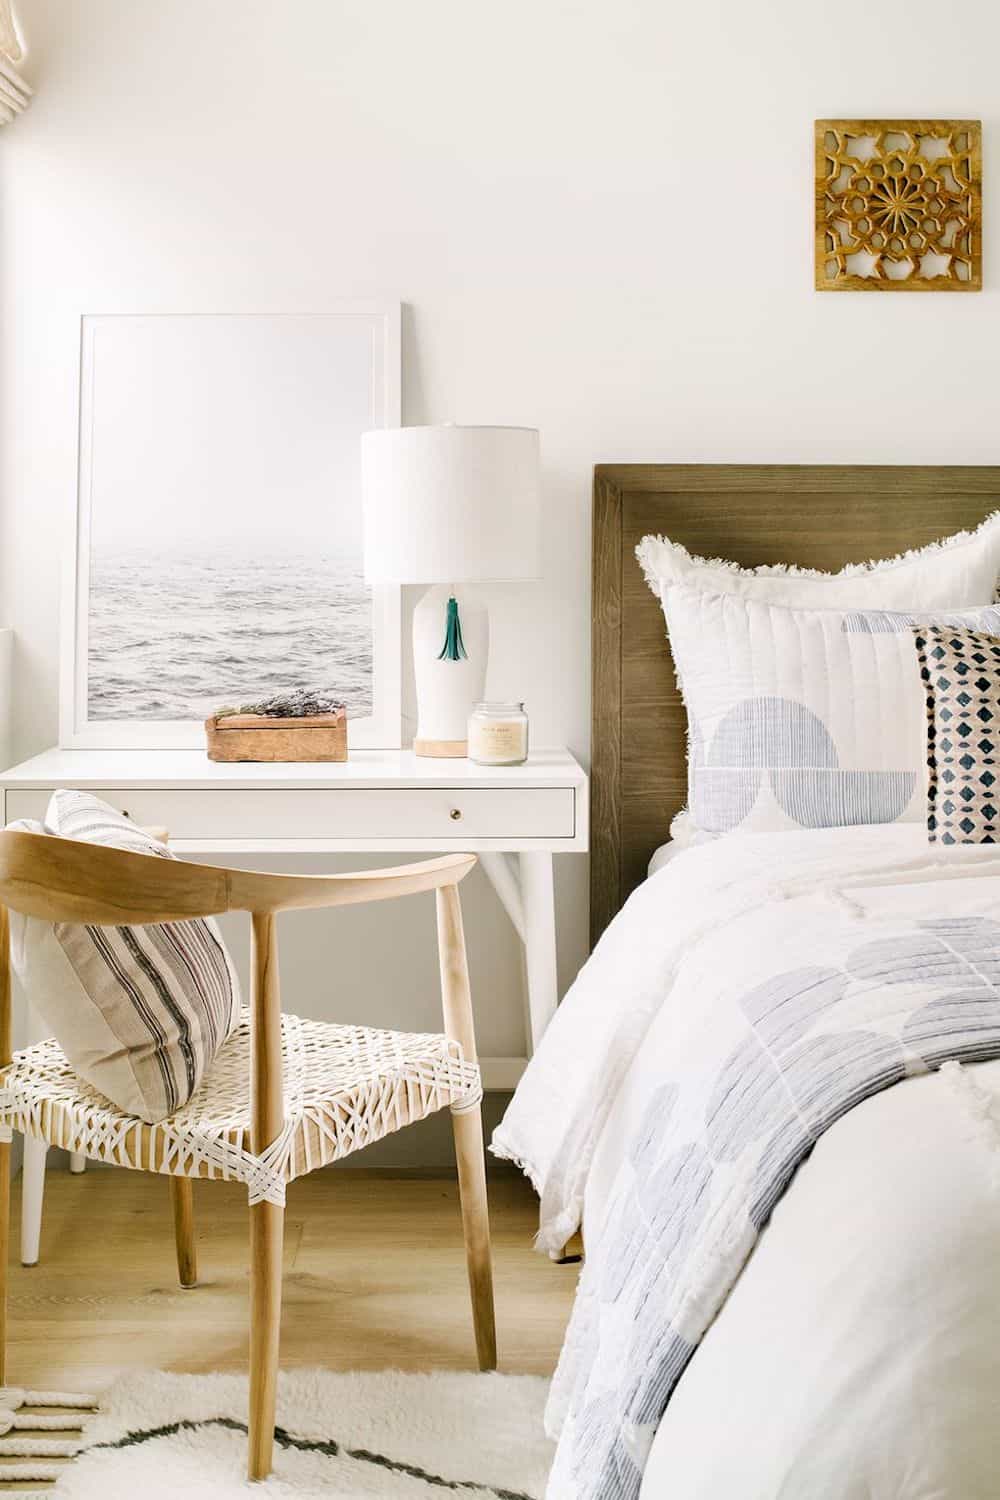 Dorm essentials: Curated decor creates a comfortable home away from home |  TribLIVE.com